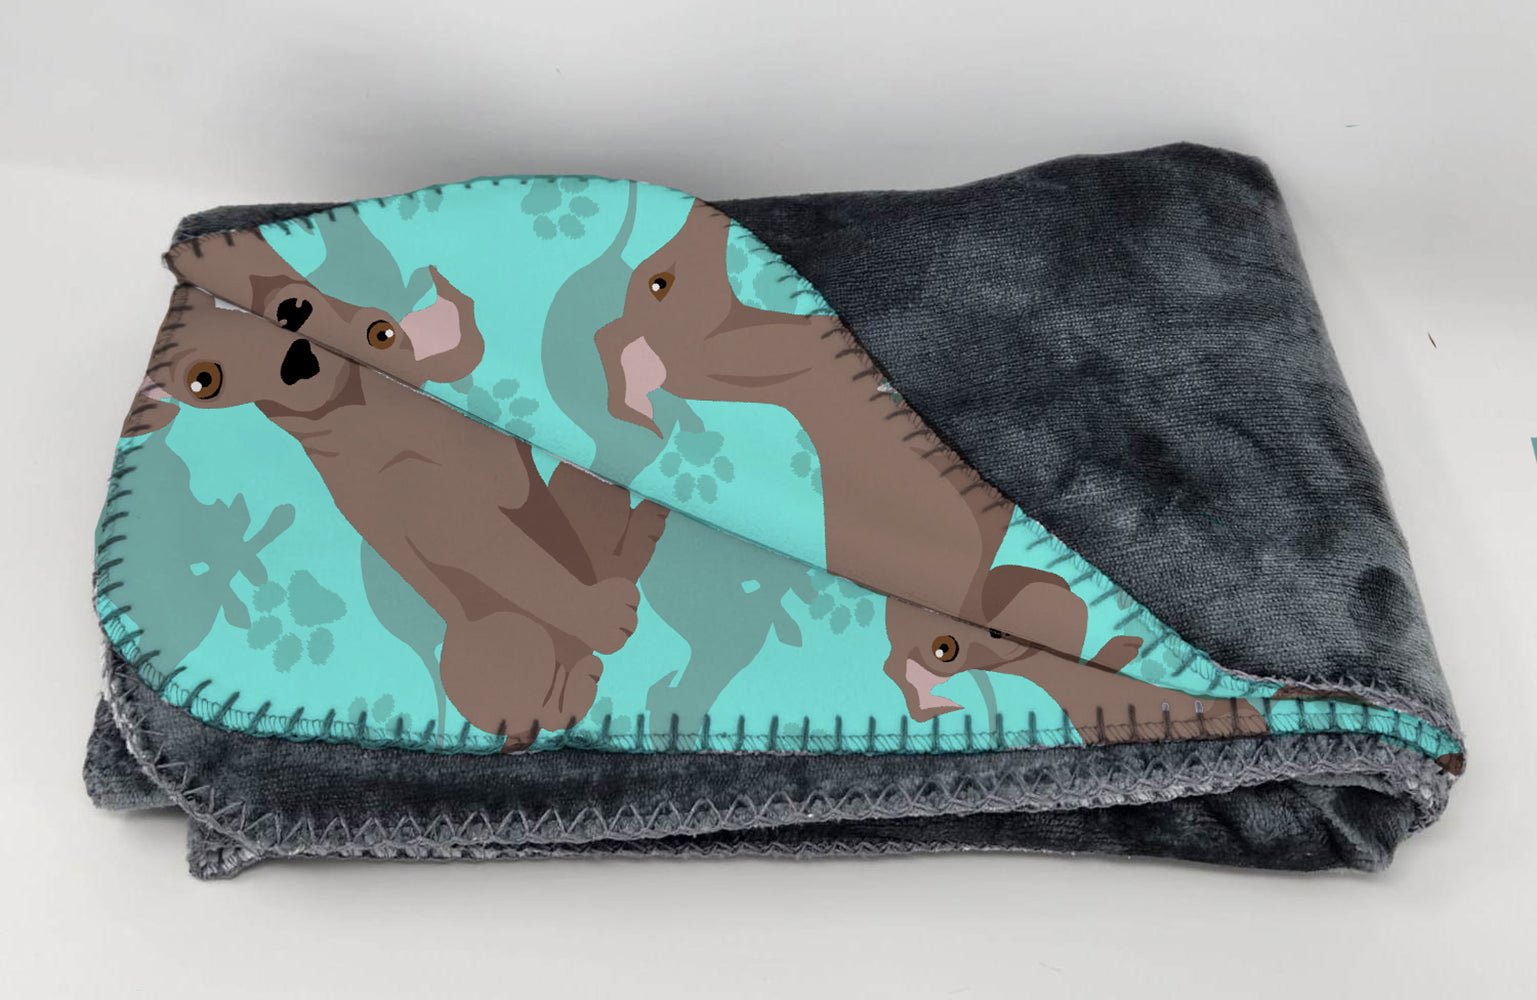 Buy this Fawn Italian Greyhound Soft Travel Blanket with Bag